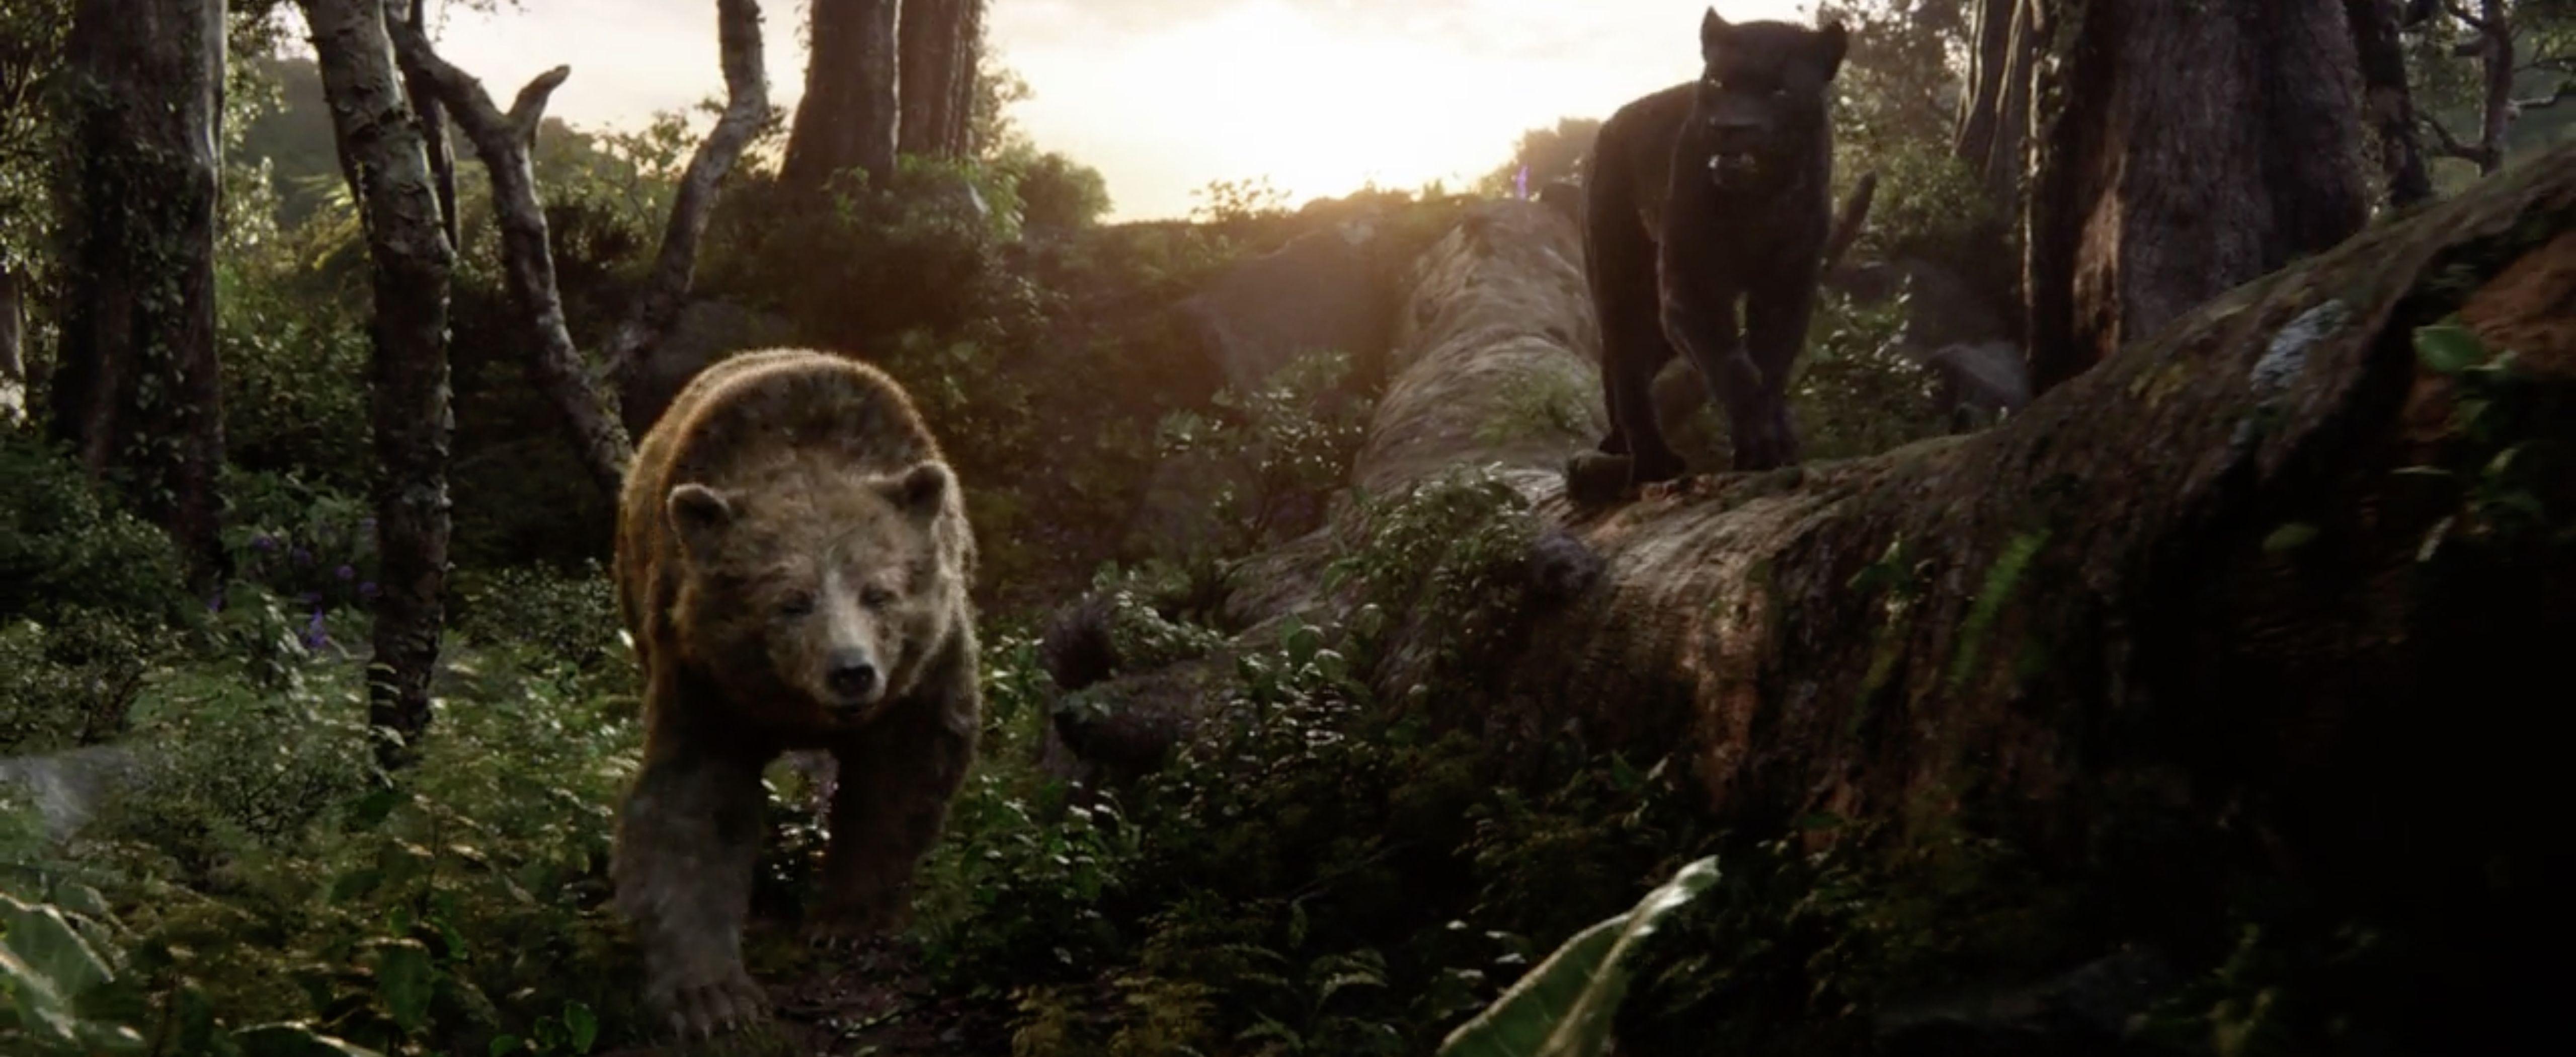 Live The Legend With This Stunning New TV Spot For THE JUNGLE BOOK